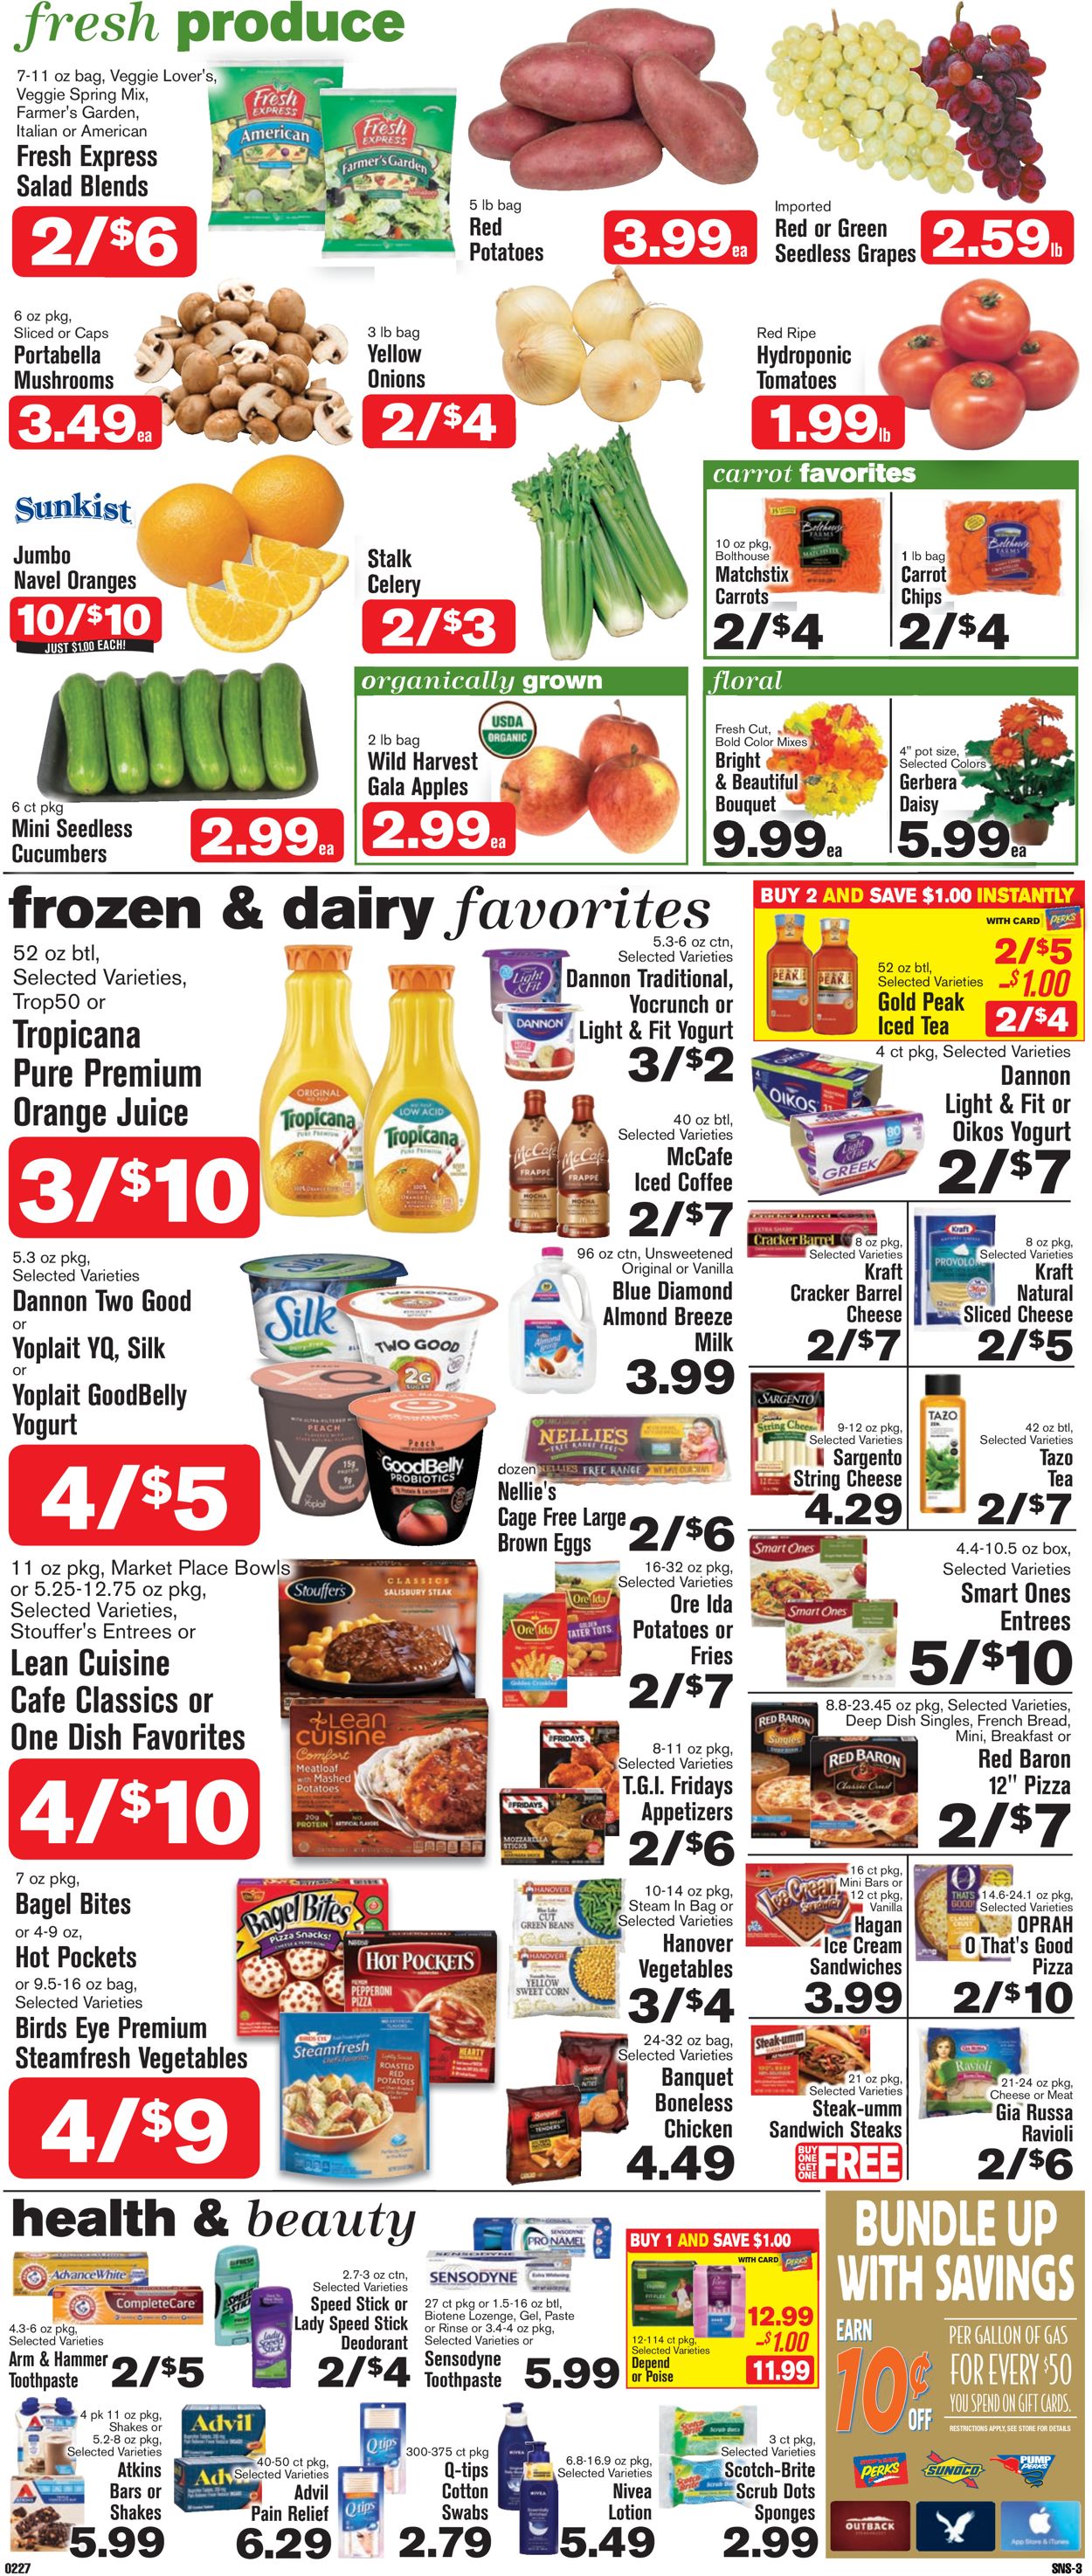 Catalogue Shop ‘n Save from 02/27/2020